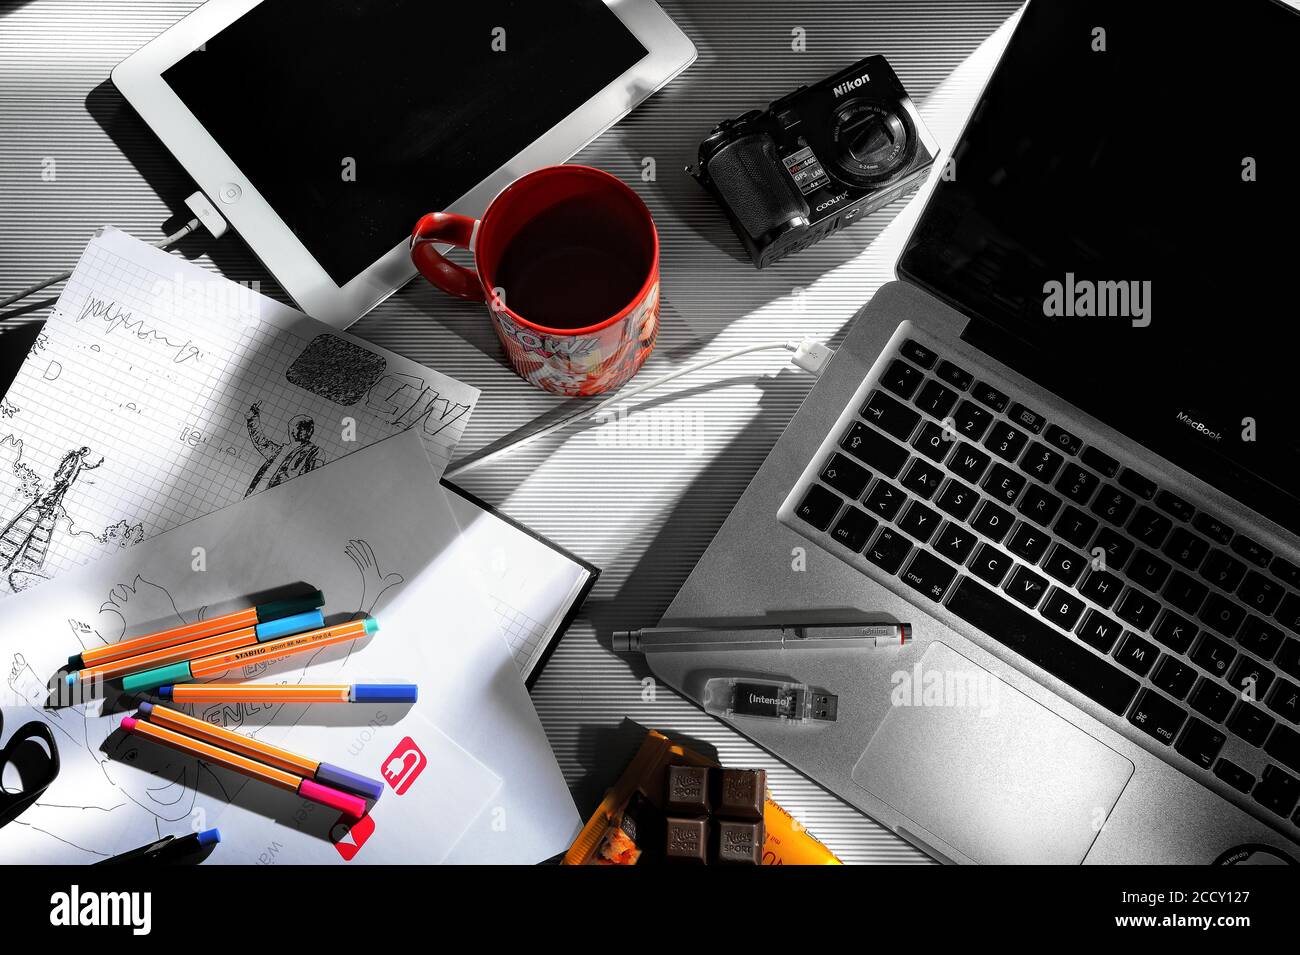 Home office, workstation with laptop, camera and sketchpad, image editing, graphic artist, photographer, Germany Stock Photo